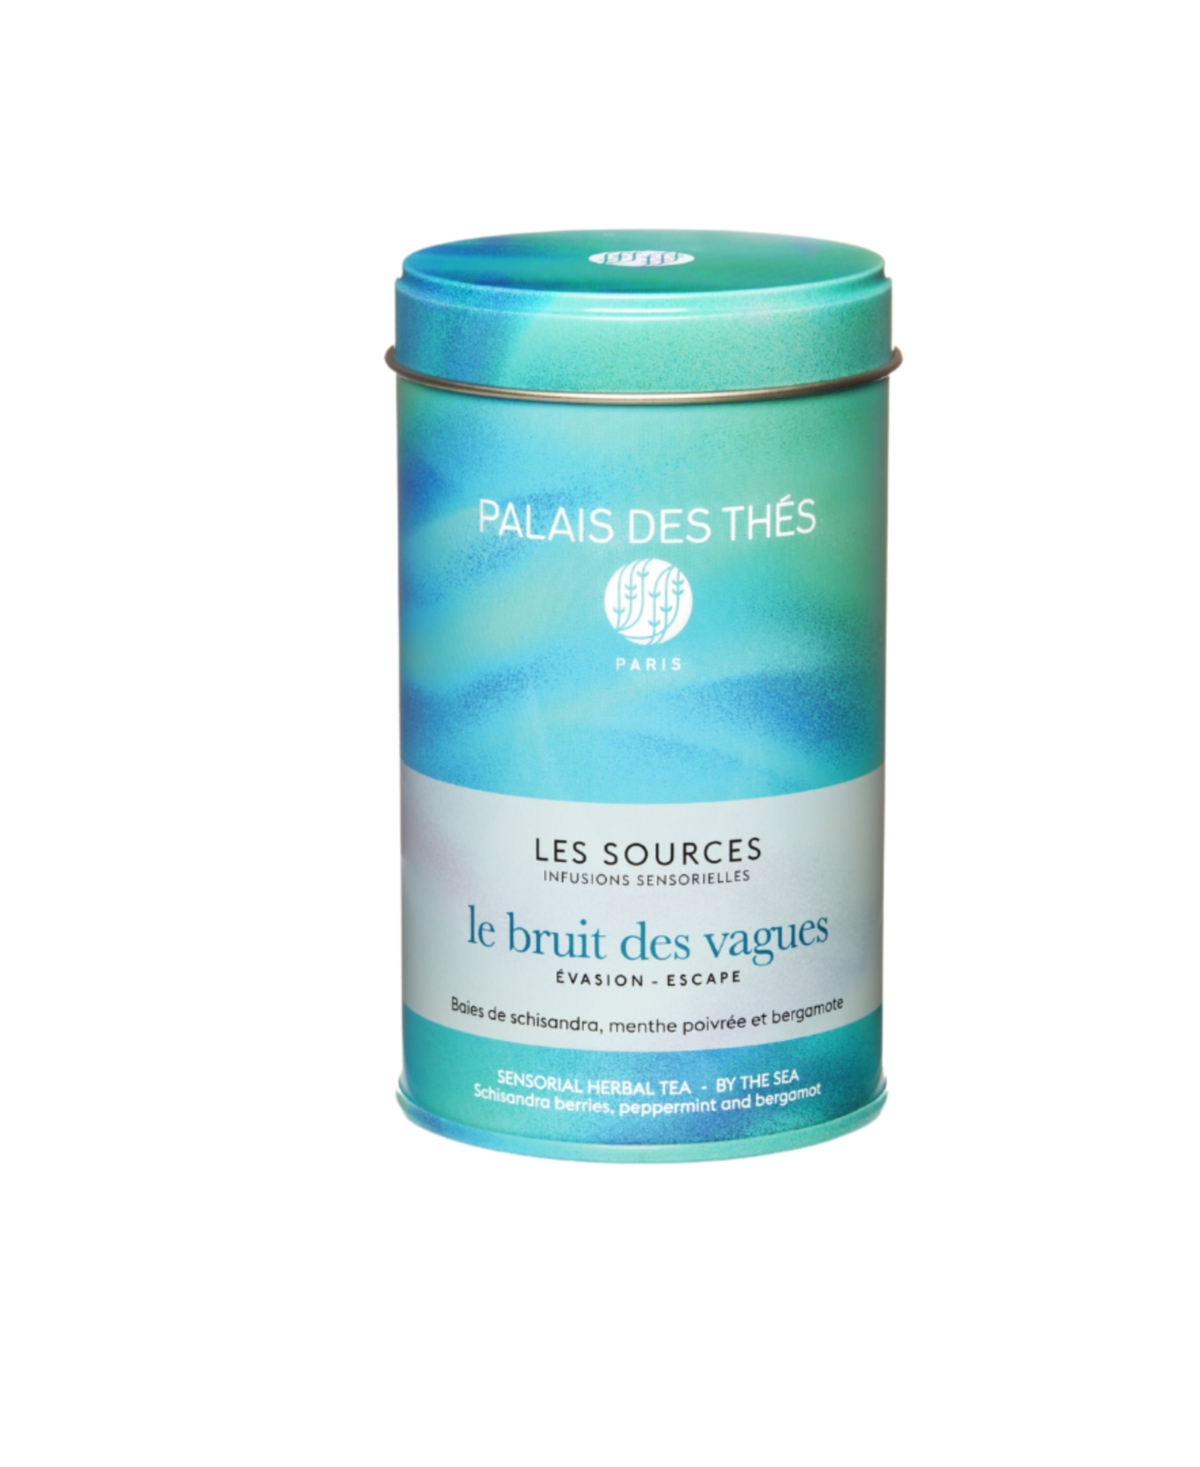 Palais Des Thes Schisandra Berries, Peppermint And Bergamot Sensorial Herbal Tea Holiday Gift In No Color